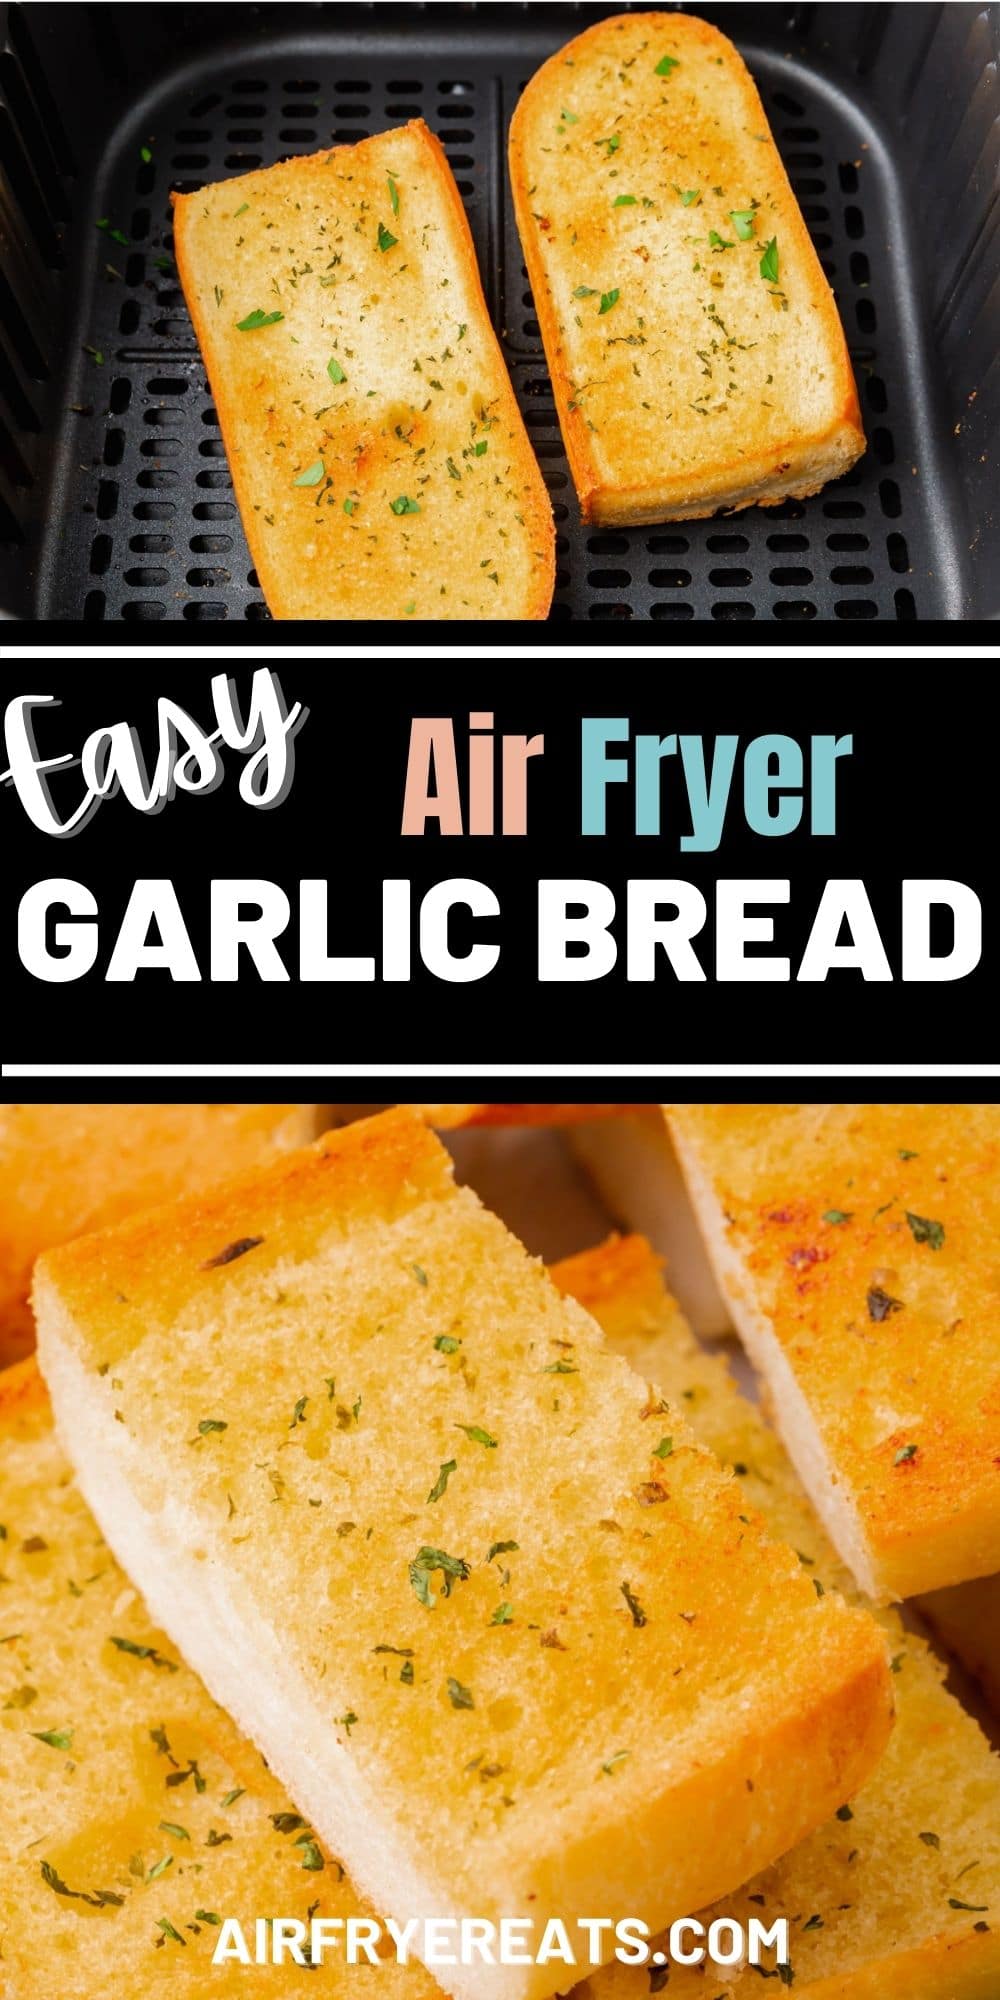 images of garlic bread made in the air fryer